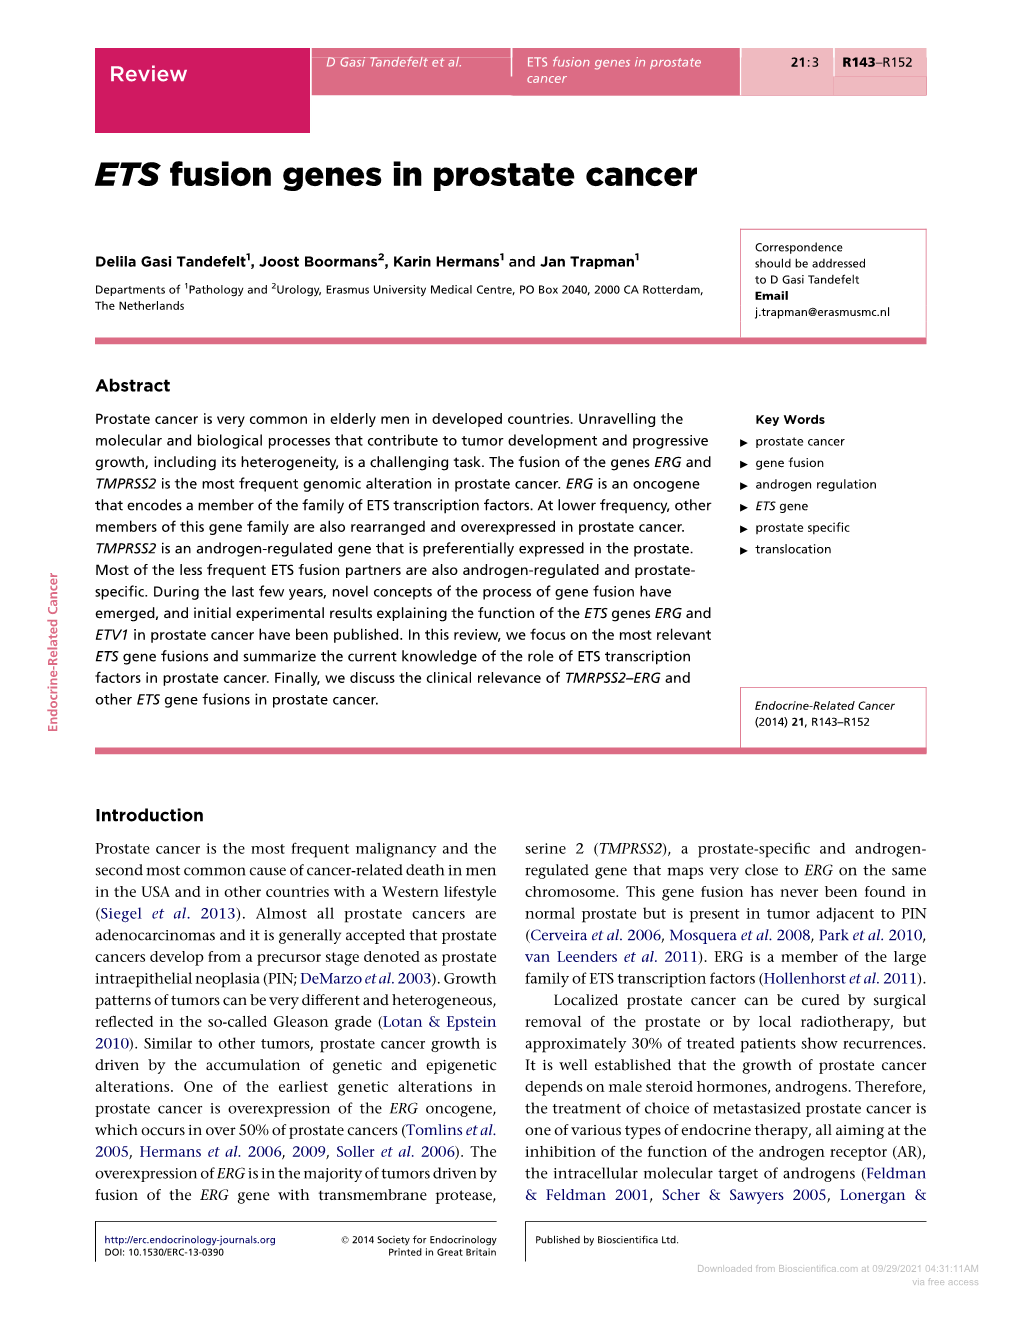 ETS Fusion Genes in Prostate Cancer